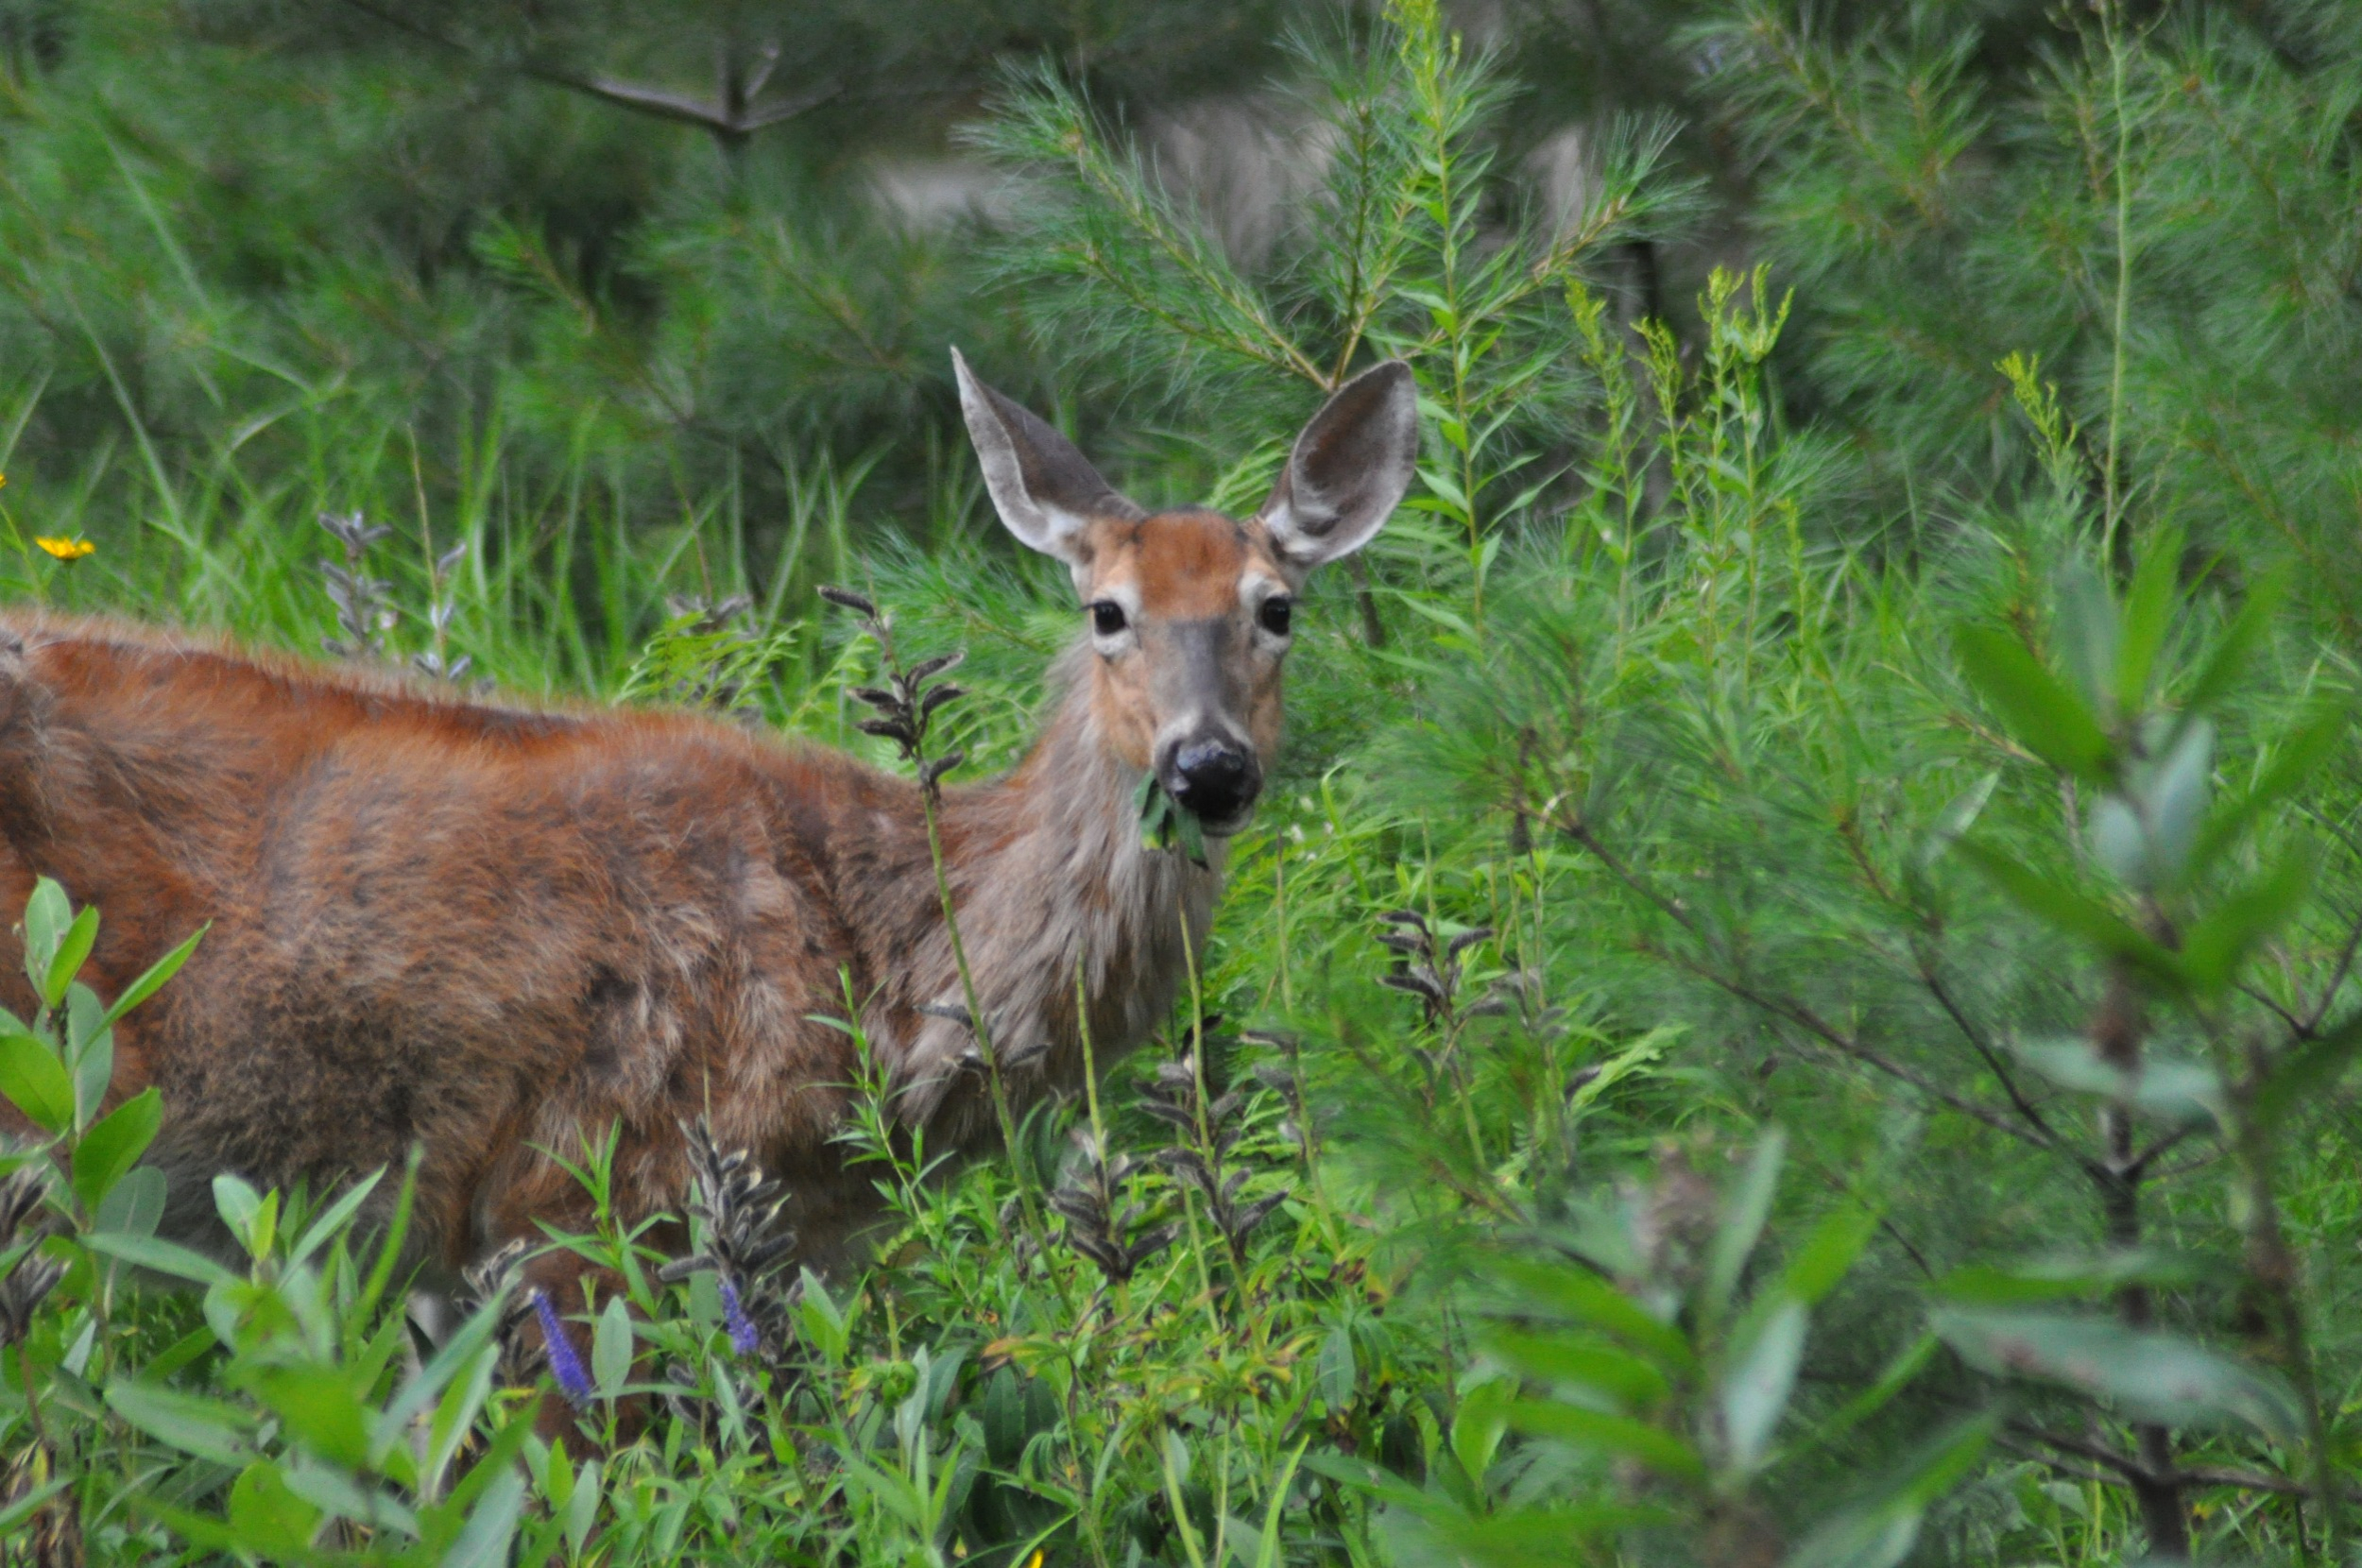 A doe stands in green foliage, chewing a leaf